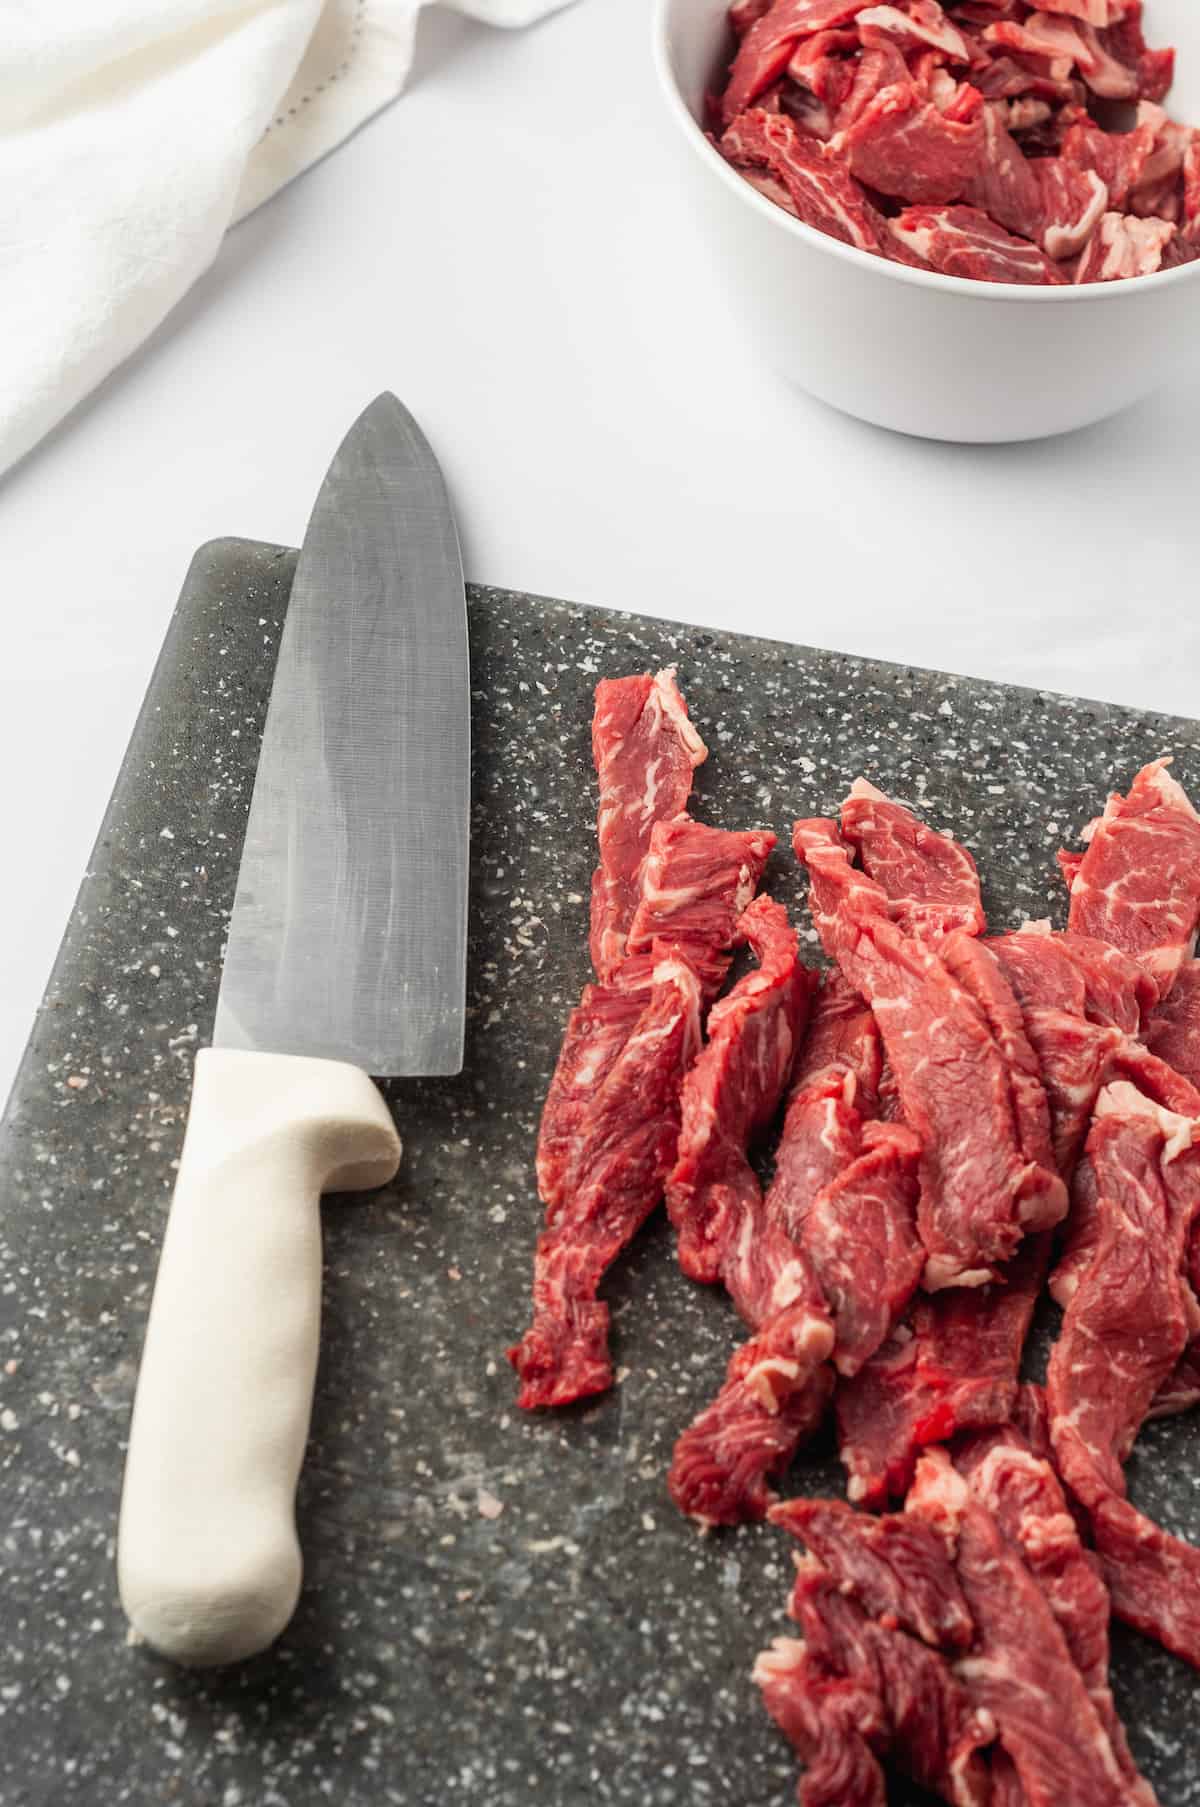 Sliced beef on cutting board with knife